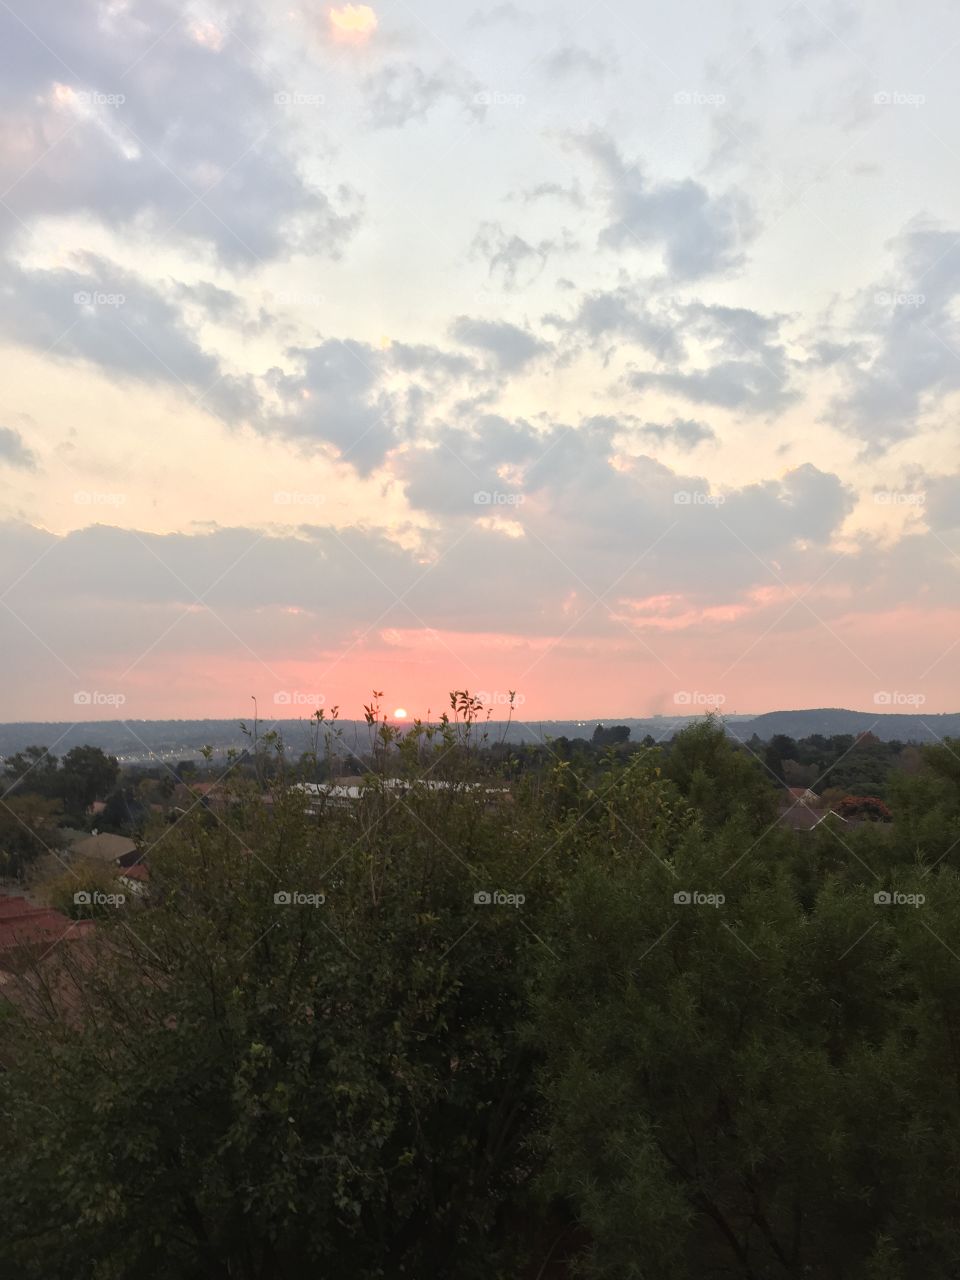 Beautiful sunset in South Africa Johannesburg 🇿🇦